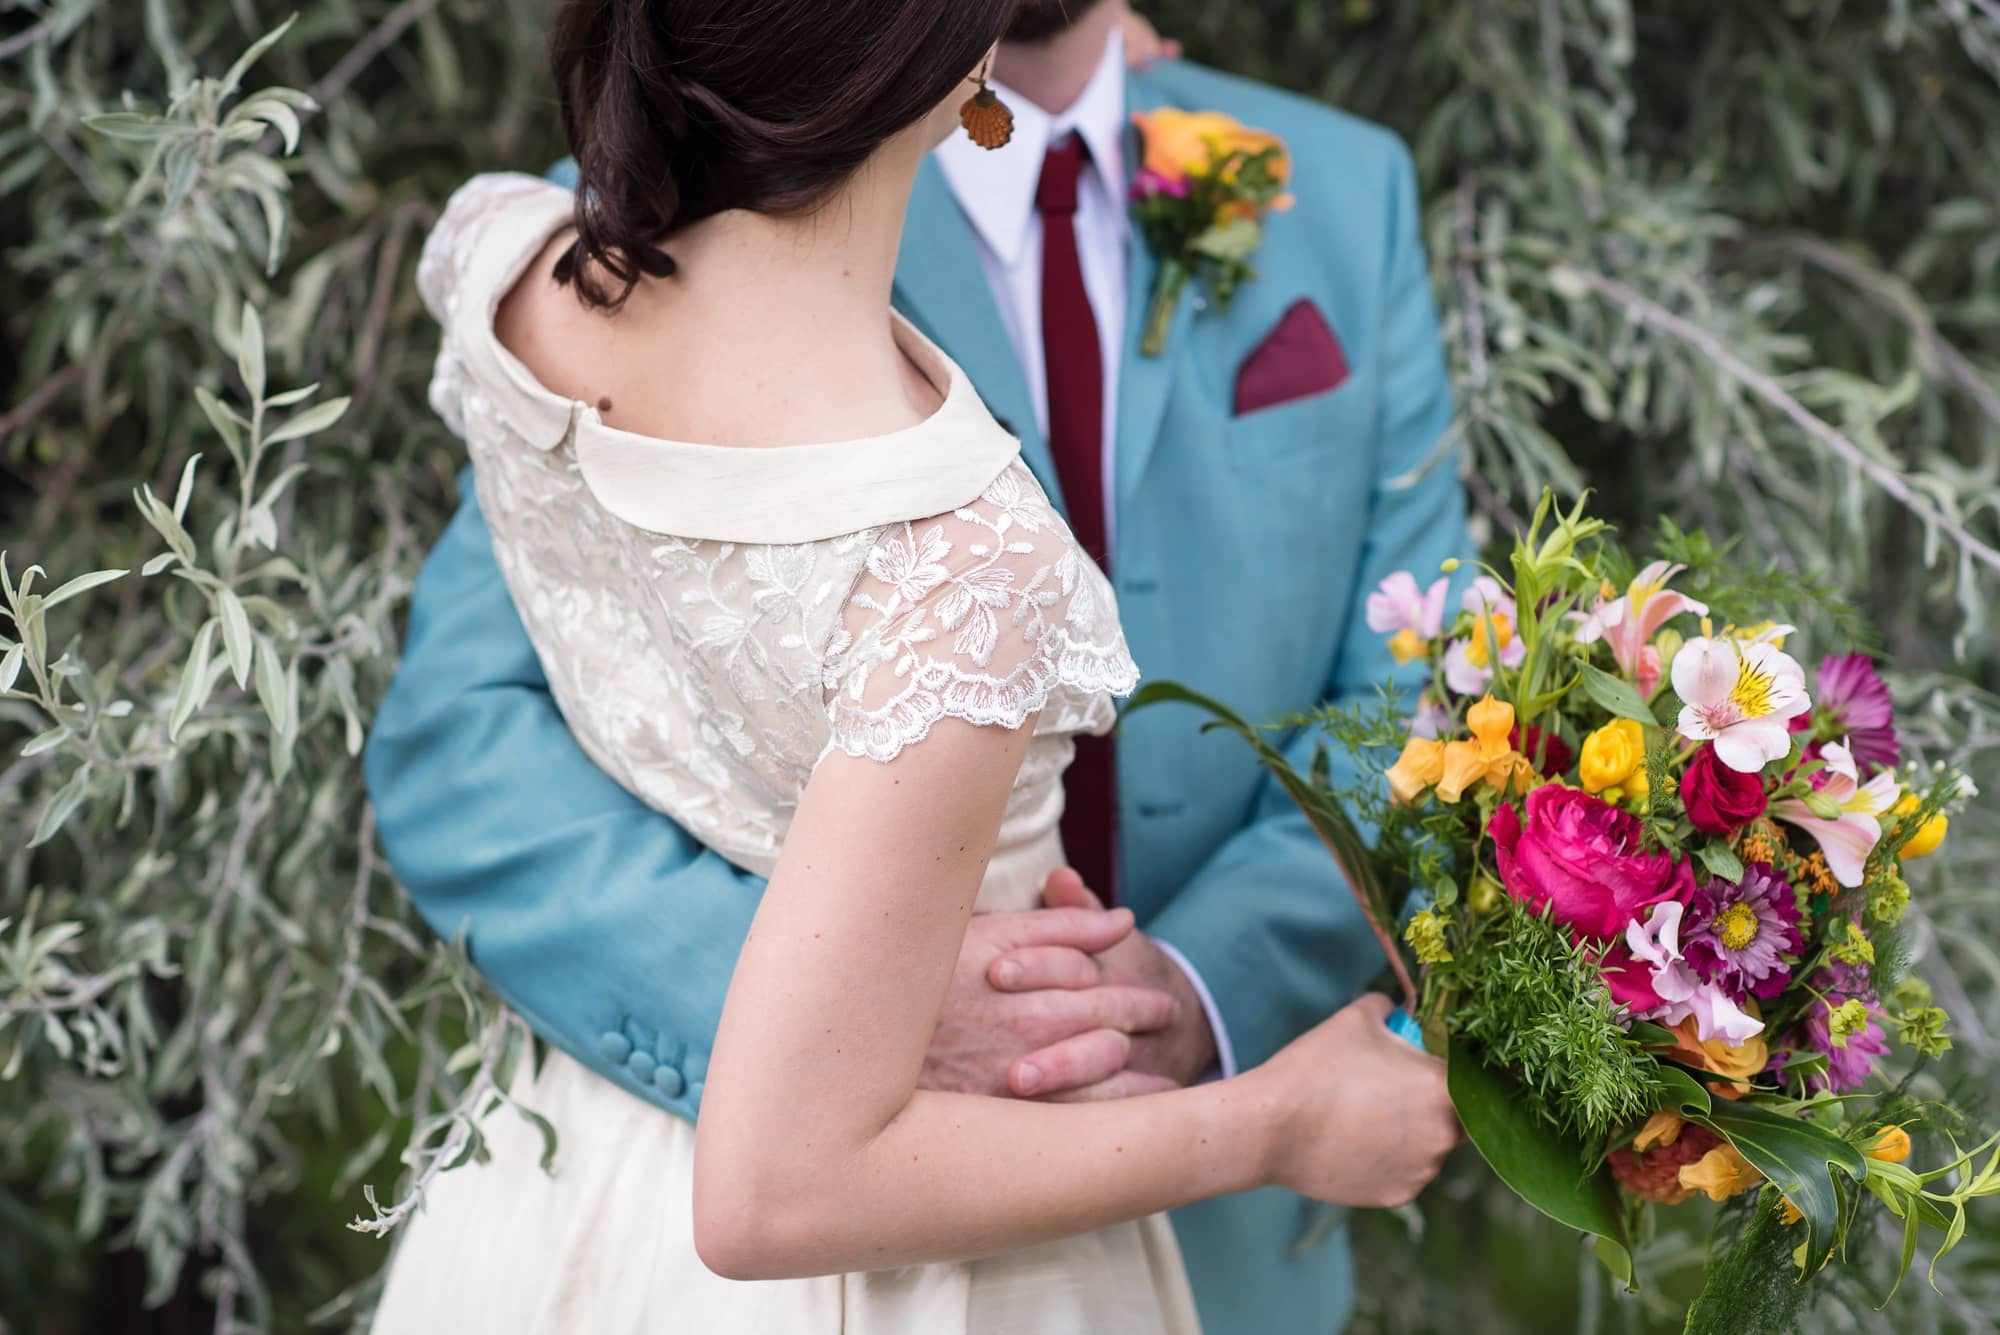 duck egg blue wedding suit in vintage inspired wedding with pink and orange flowers